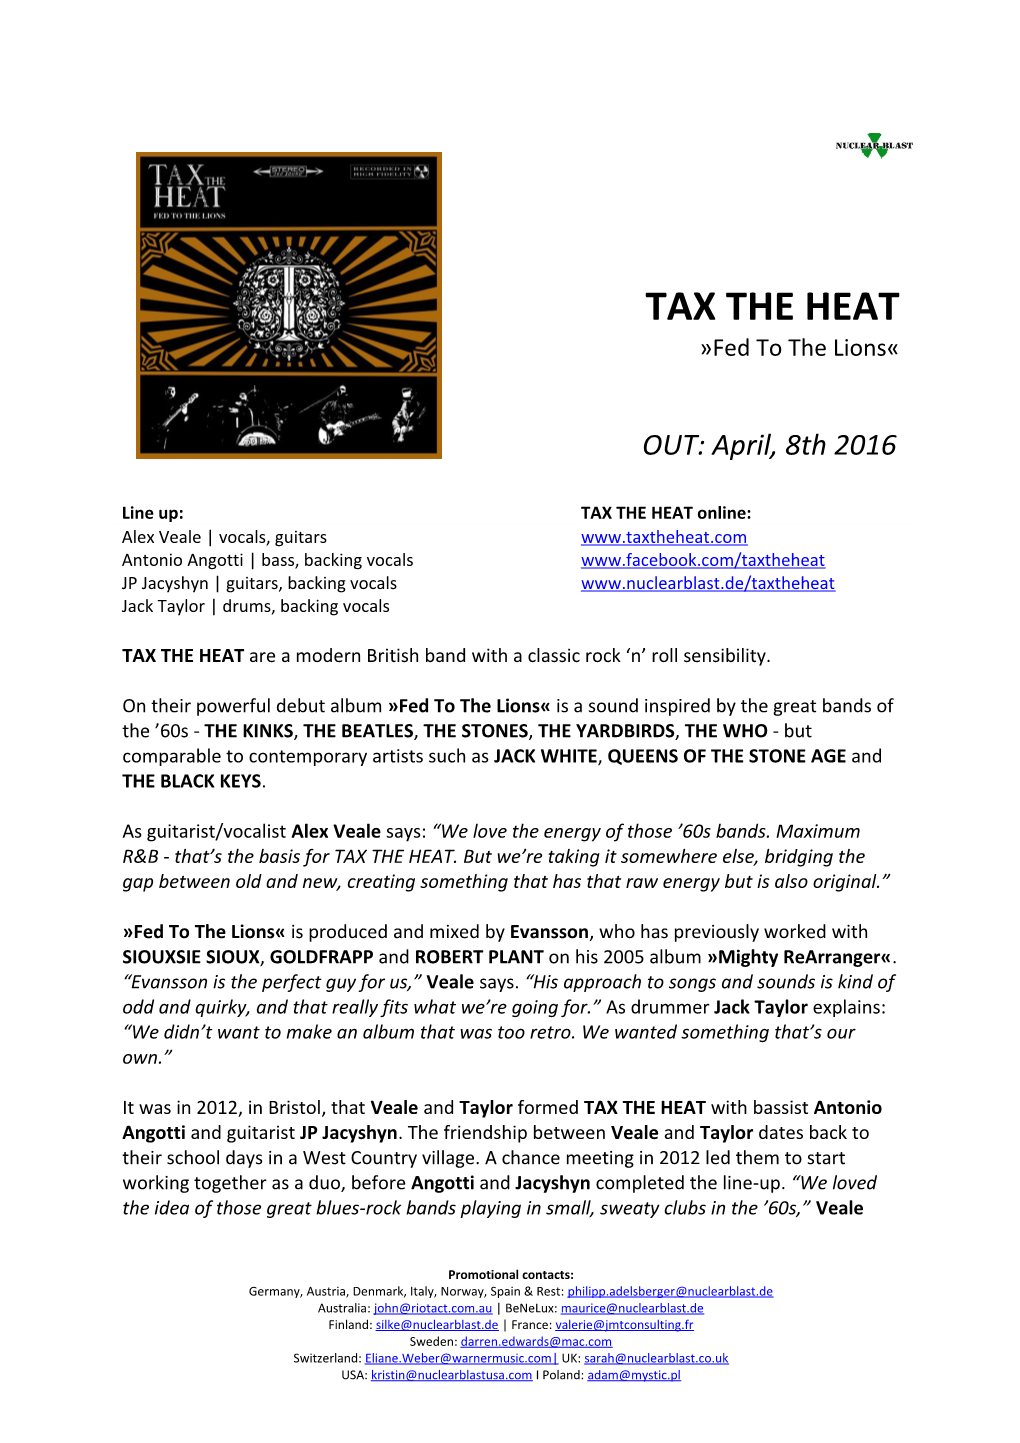 TAX the HEAT Are a Modern British Band with a Classic Rock N Roll Sensibility